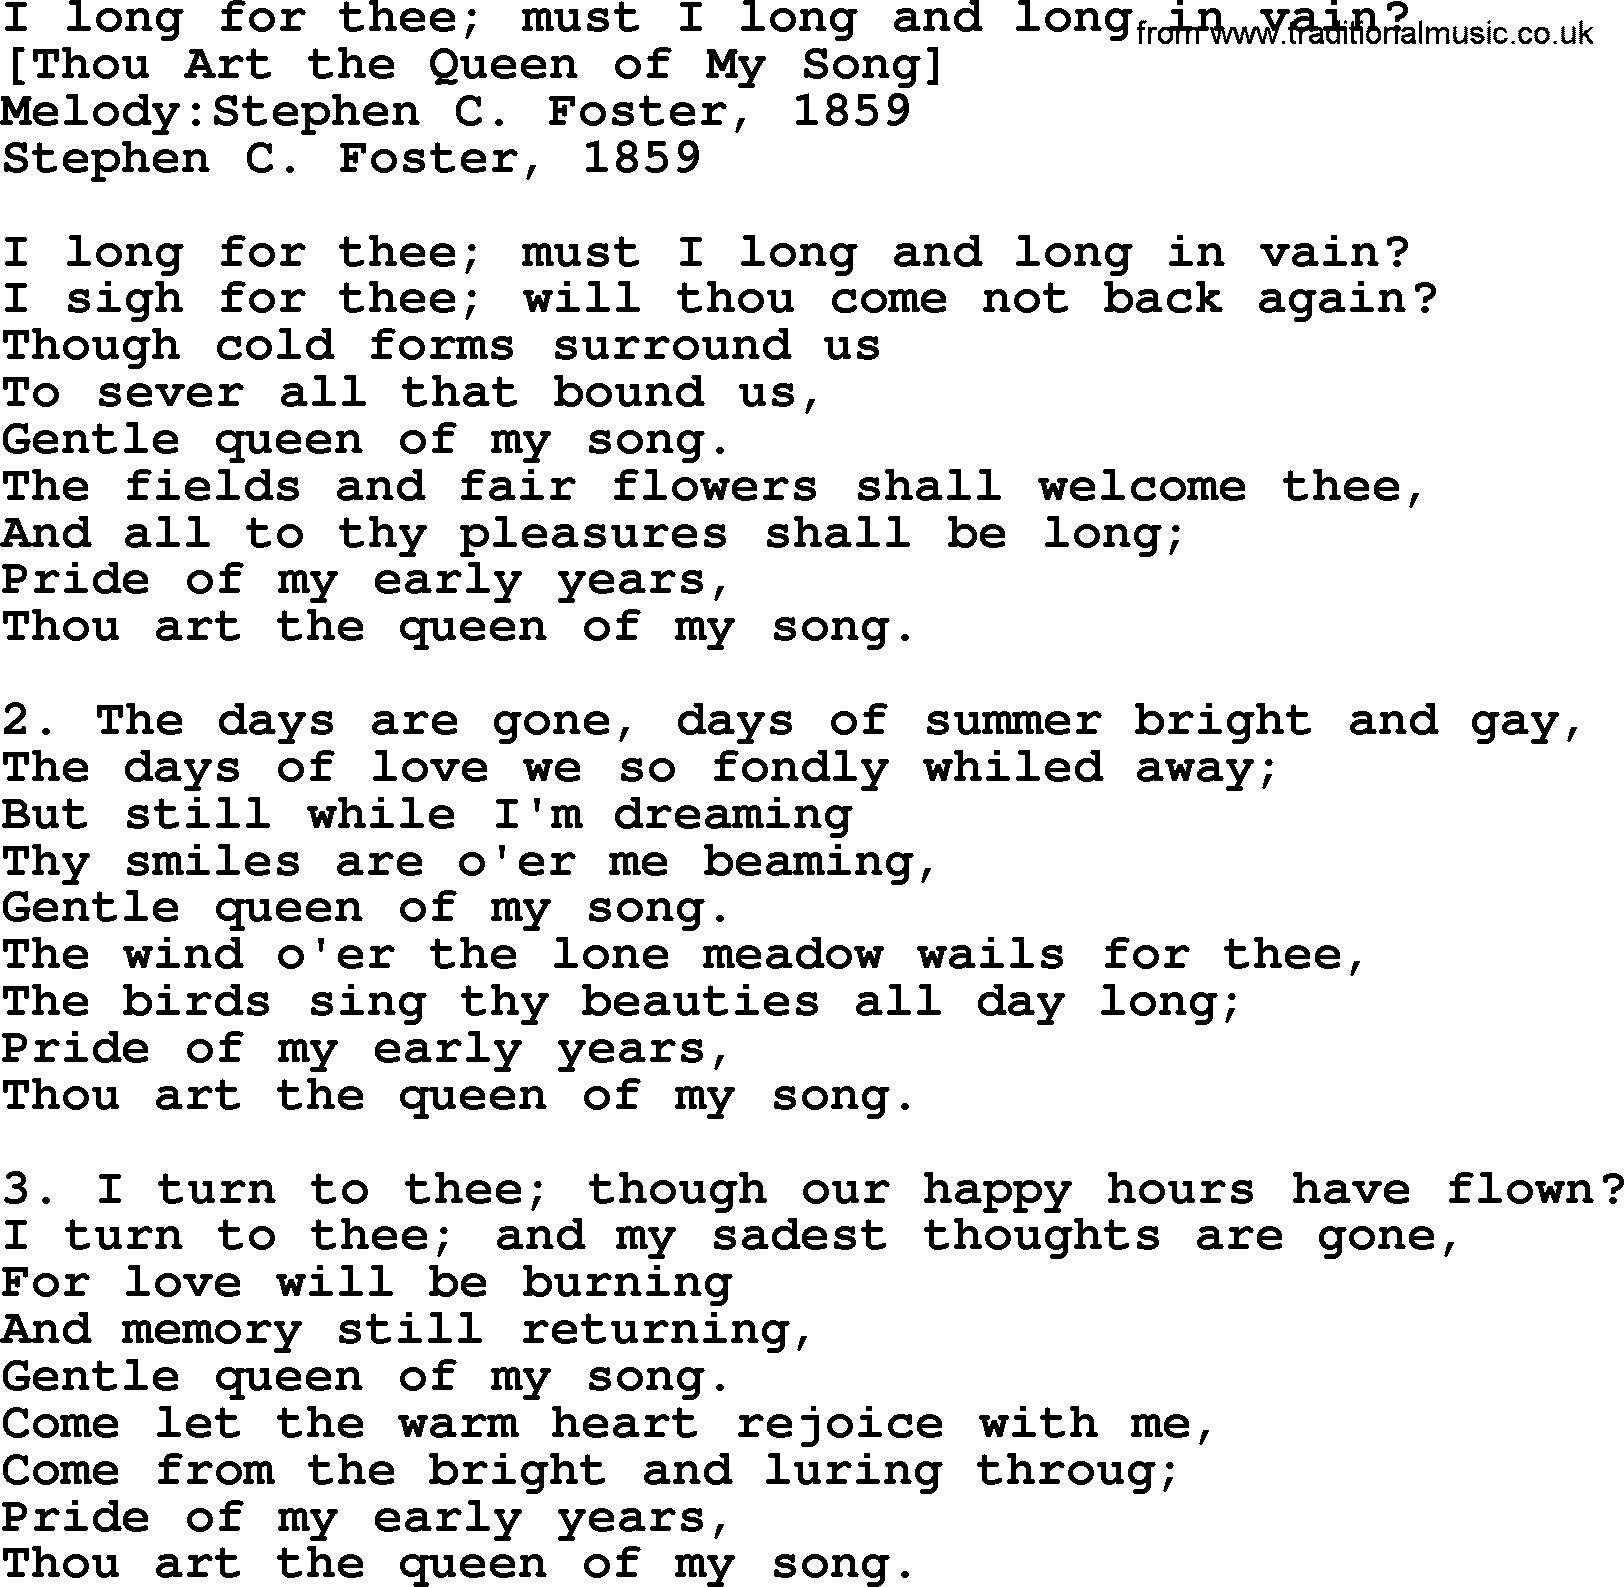 Old American Song: I Long For Thee; Must I Long And Long In Vain, lyrics